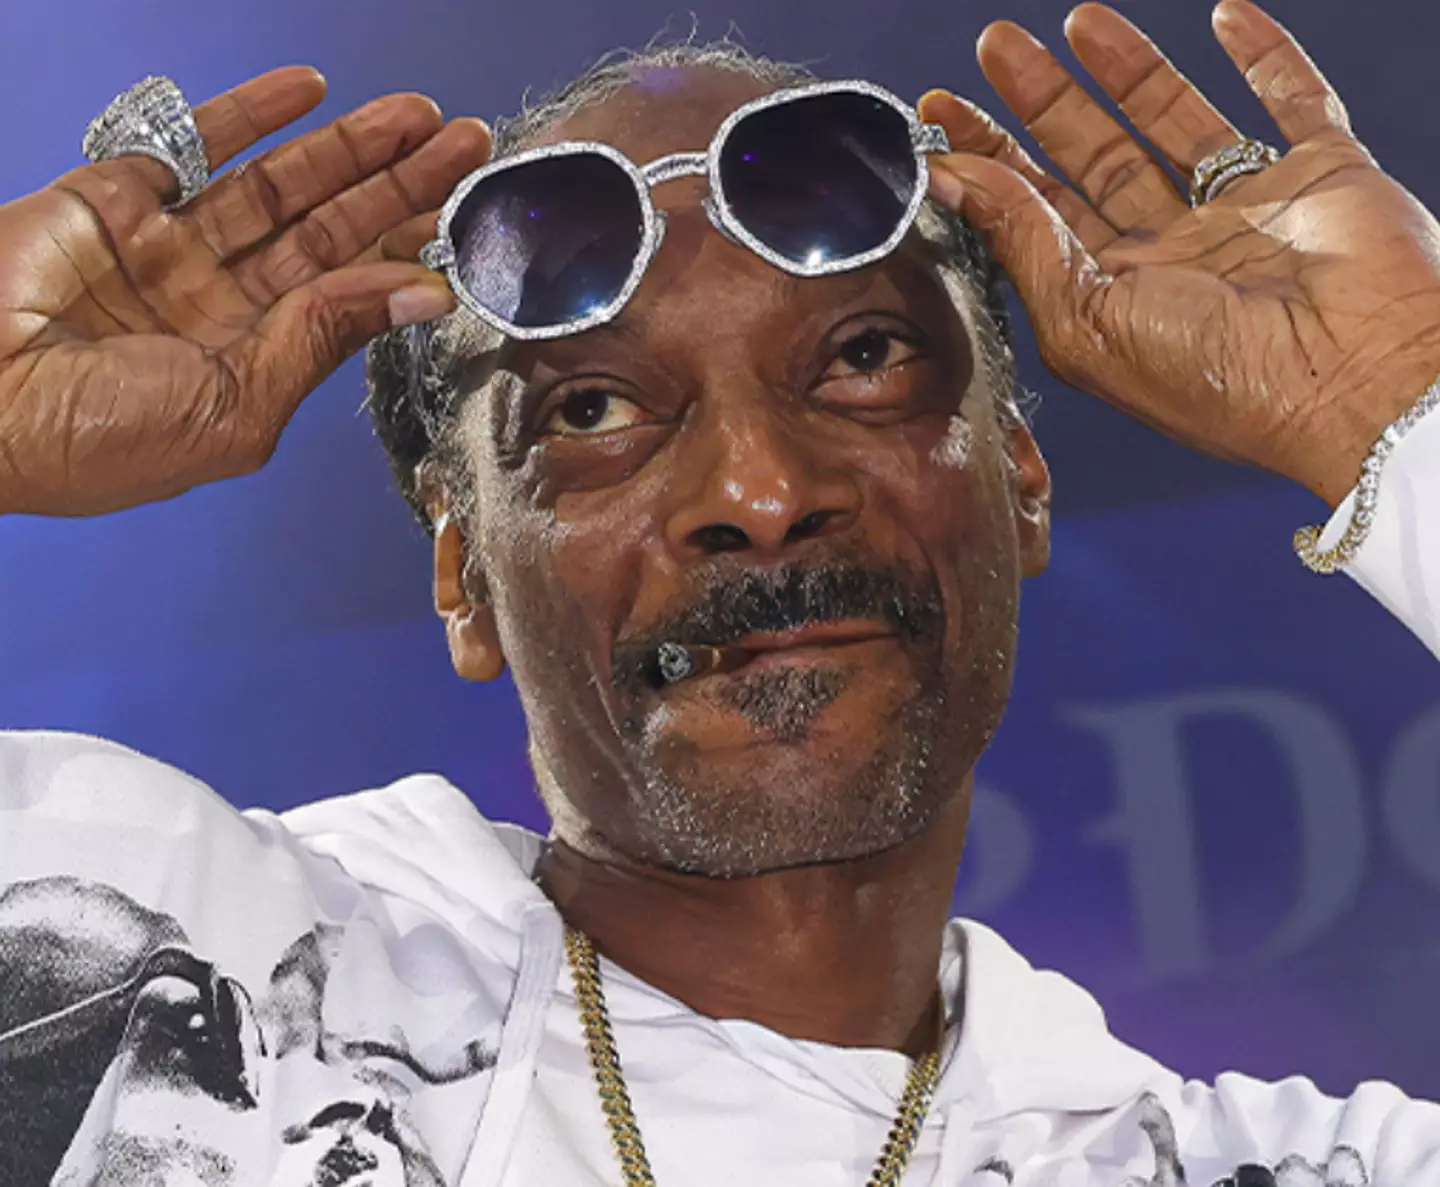 Snoop claimed $100 million wasn't enough.